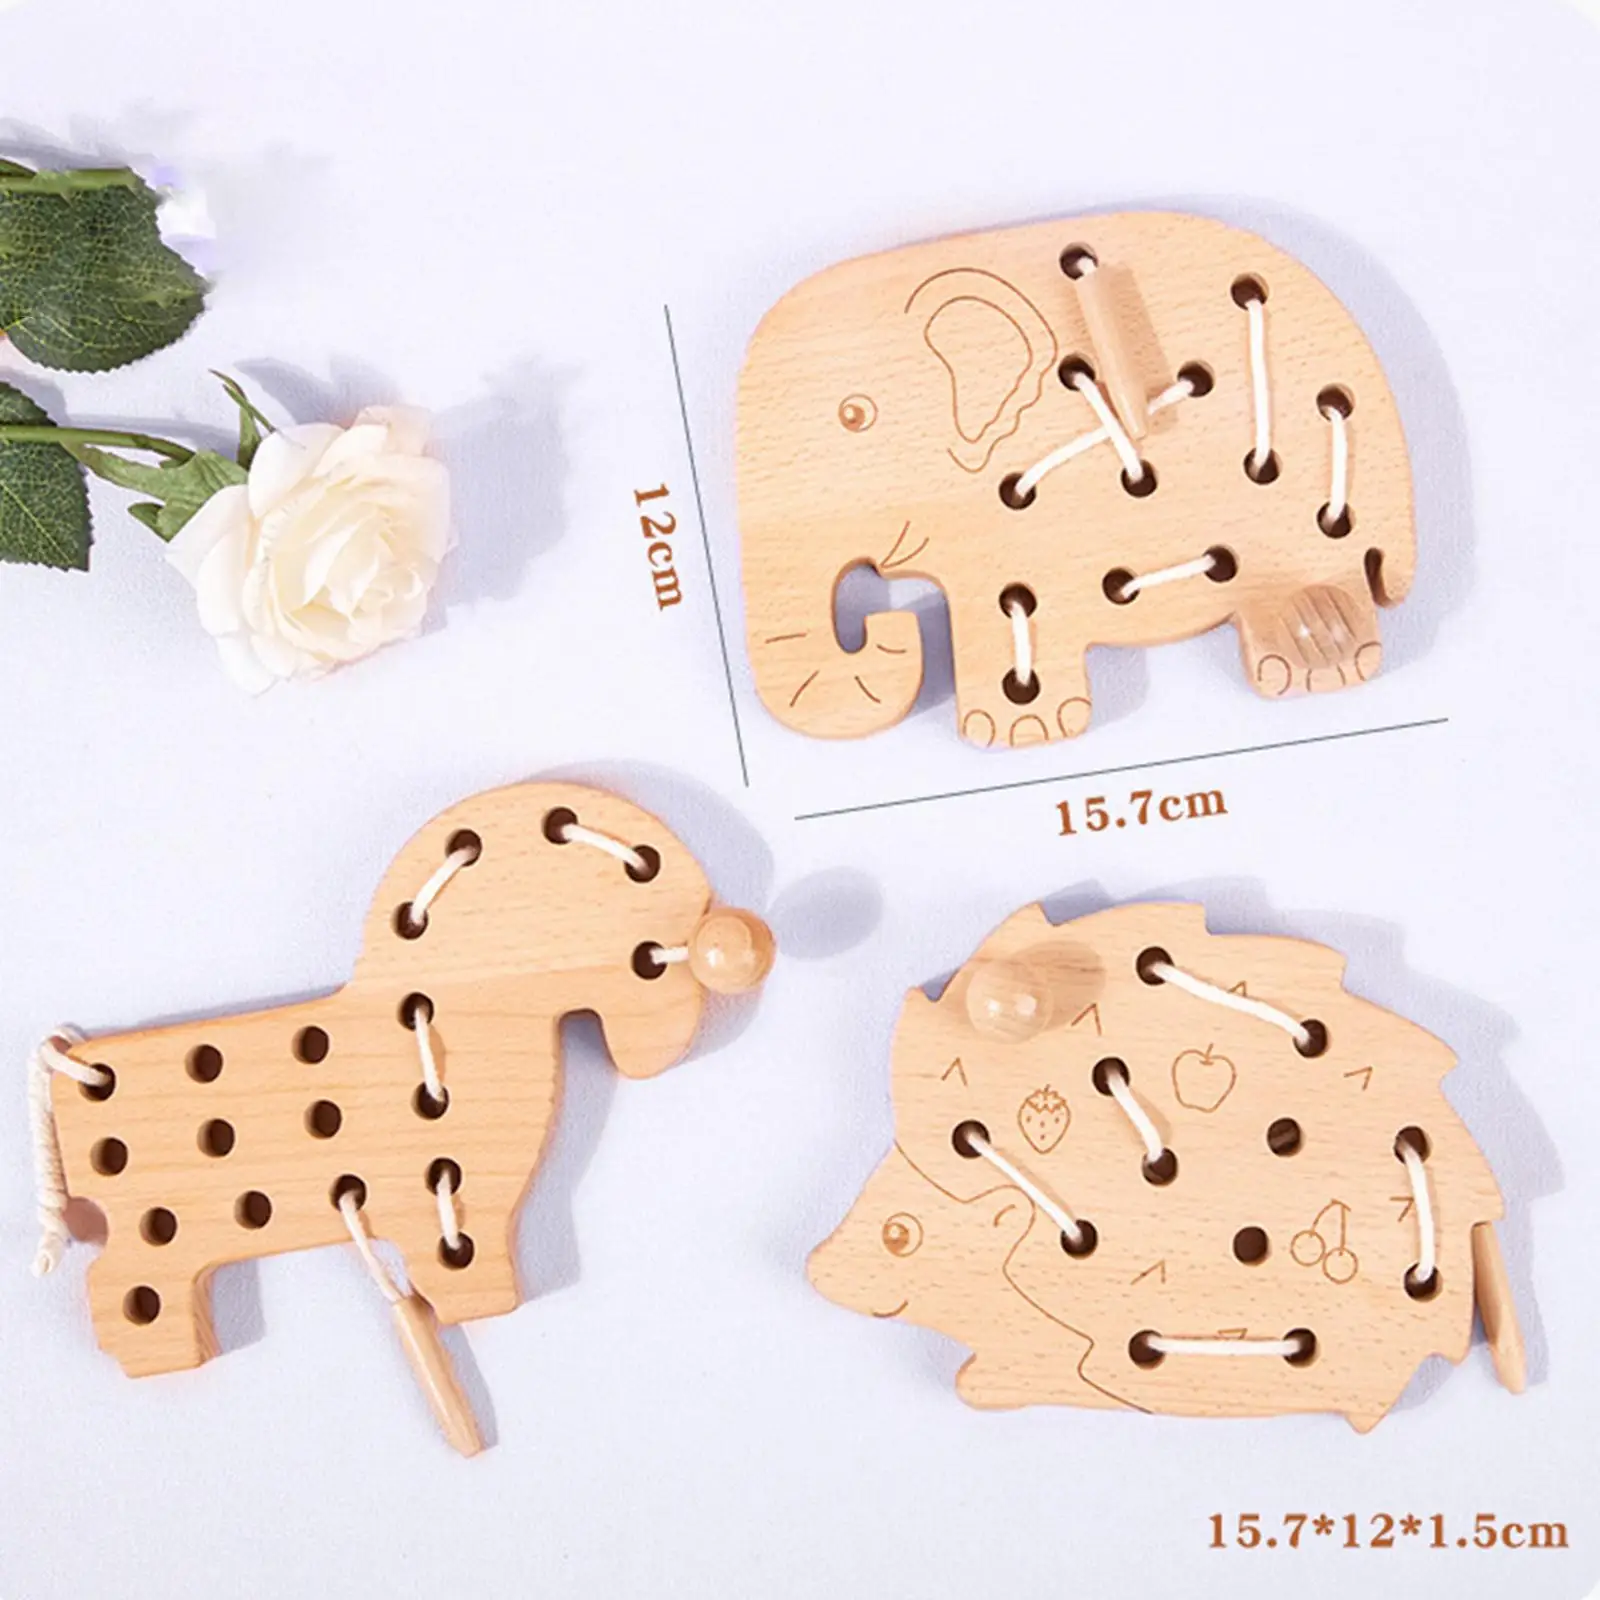 3x Wooden Lacing Threading Toys Fine Motor Skills Early Learning Educational Wood Lace Block Puzzle for Airplane Toddlers Boys